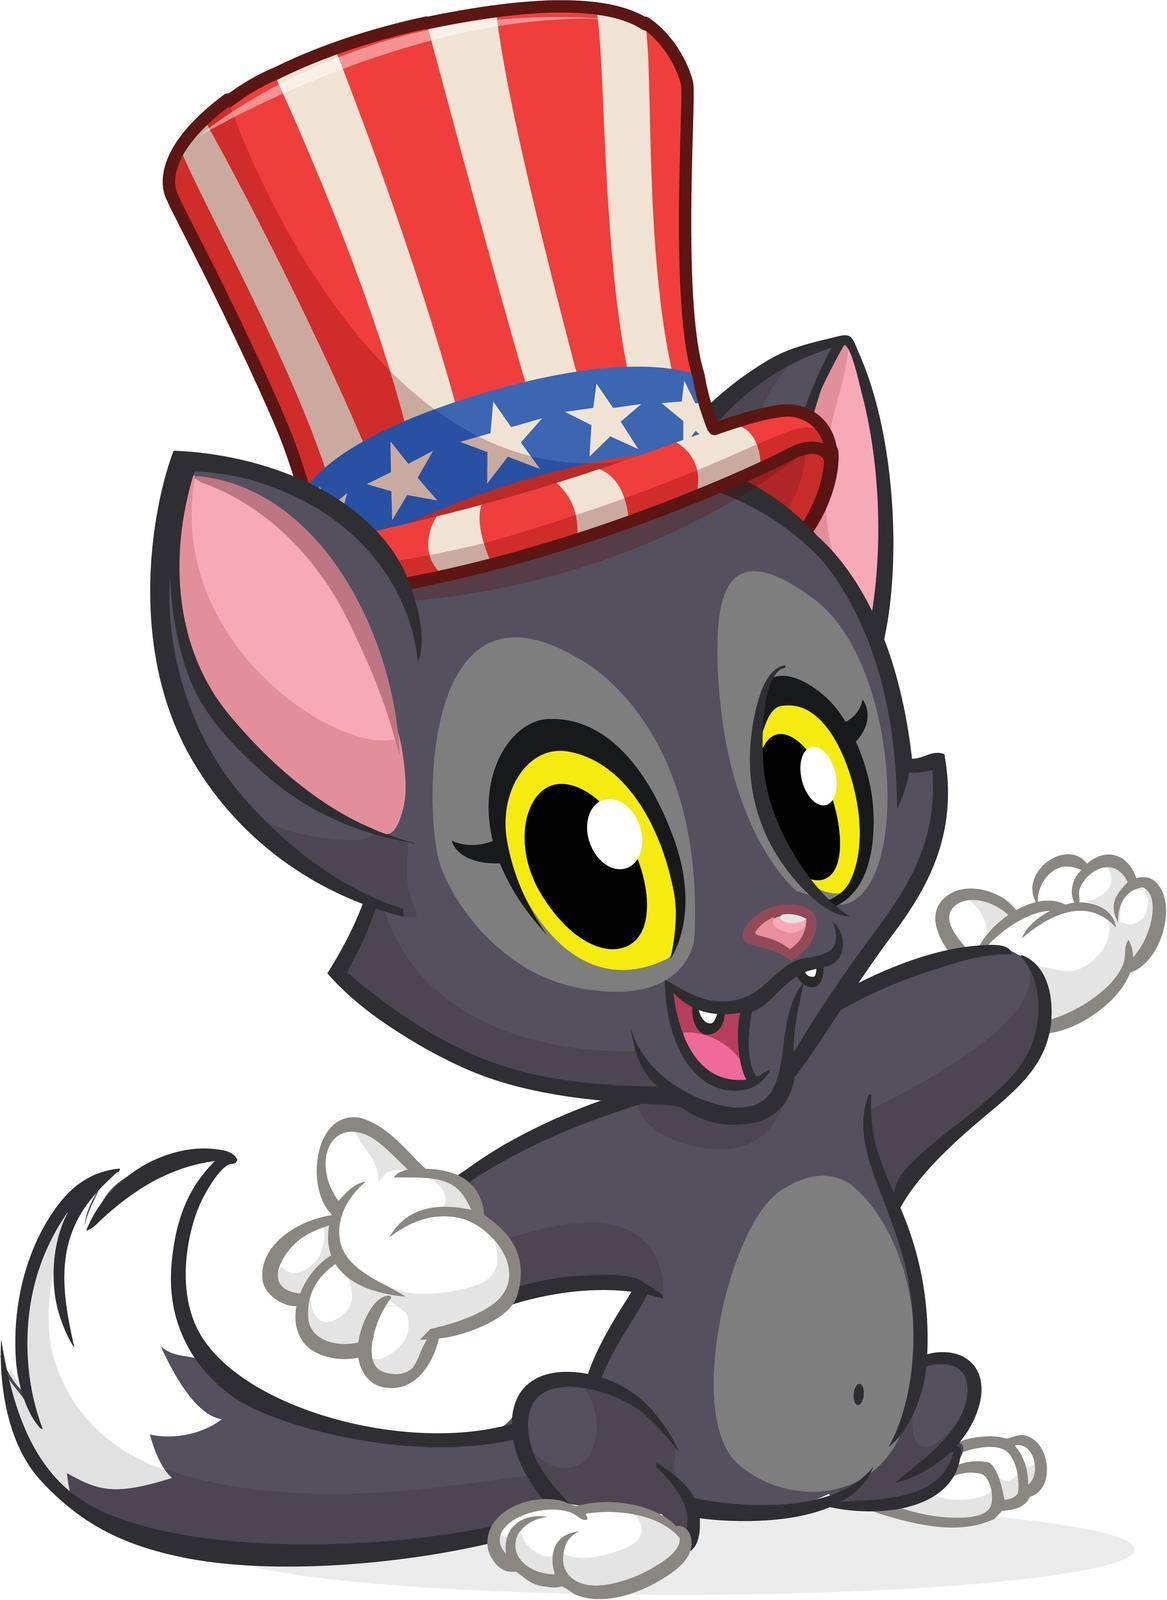 Funny cartoon fat cat sitting and wearing Uncle Sam hat. Kitty character design for American Independence Day. Vector illustration for print, poster or invitation by drawkman